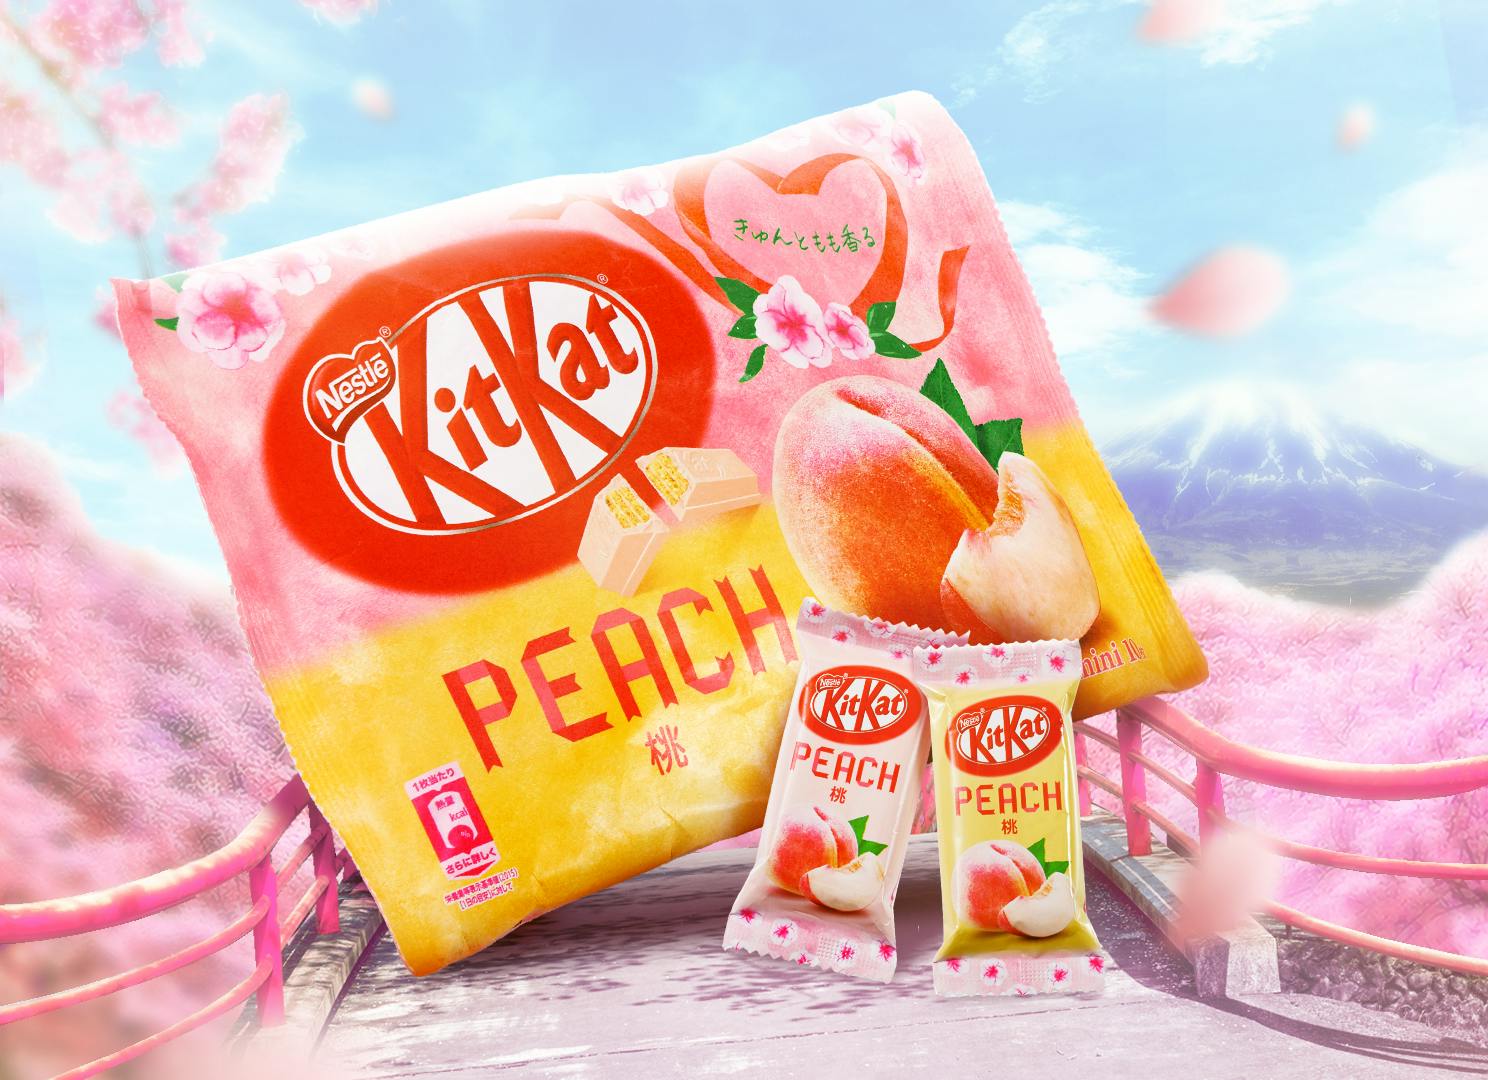 Limited edition Japanese KitKat Peach is displayed on a bridge with sakura petals falling slowly